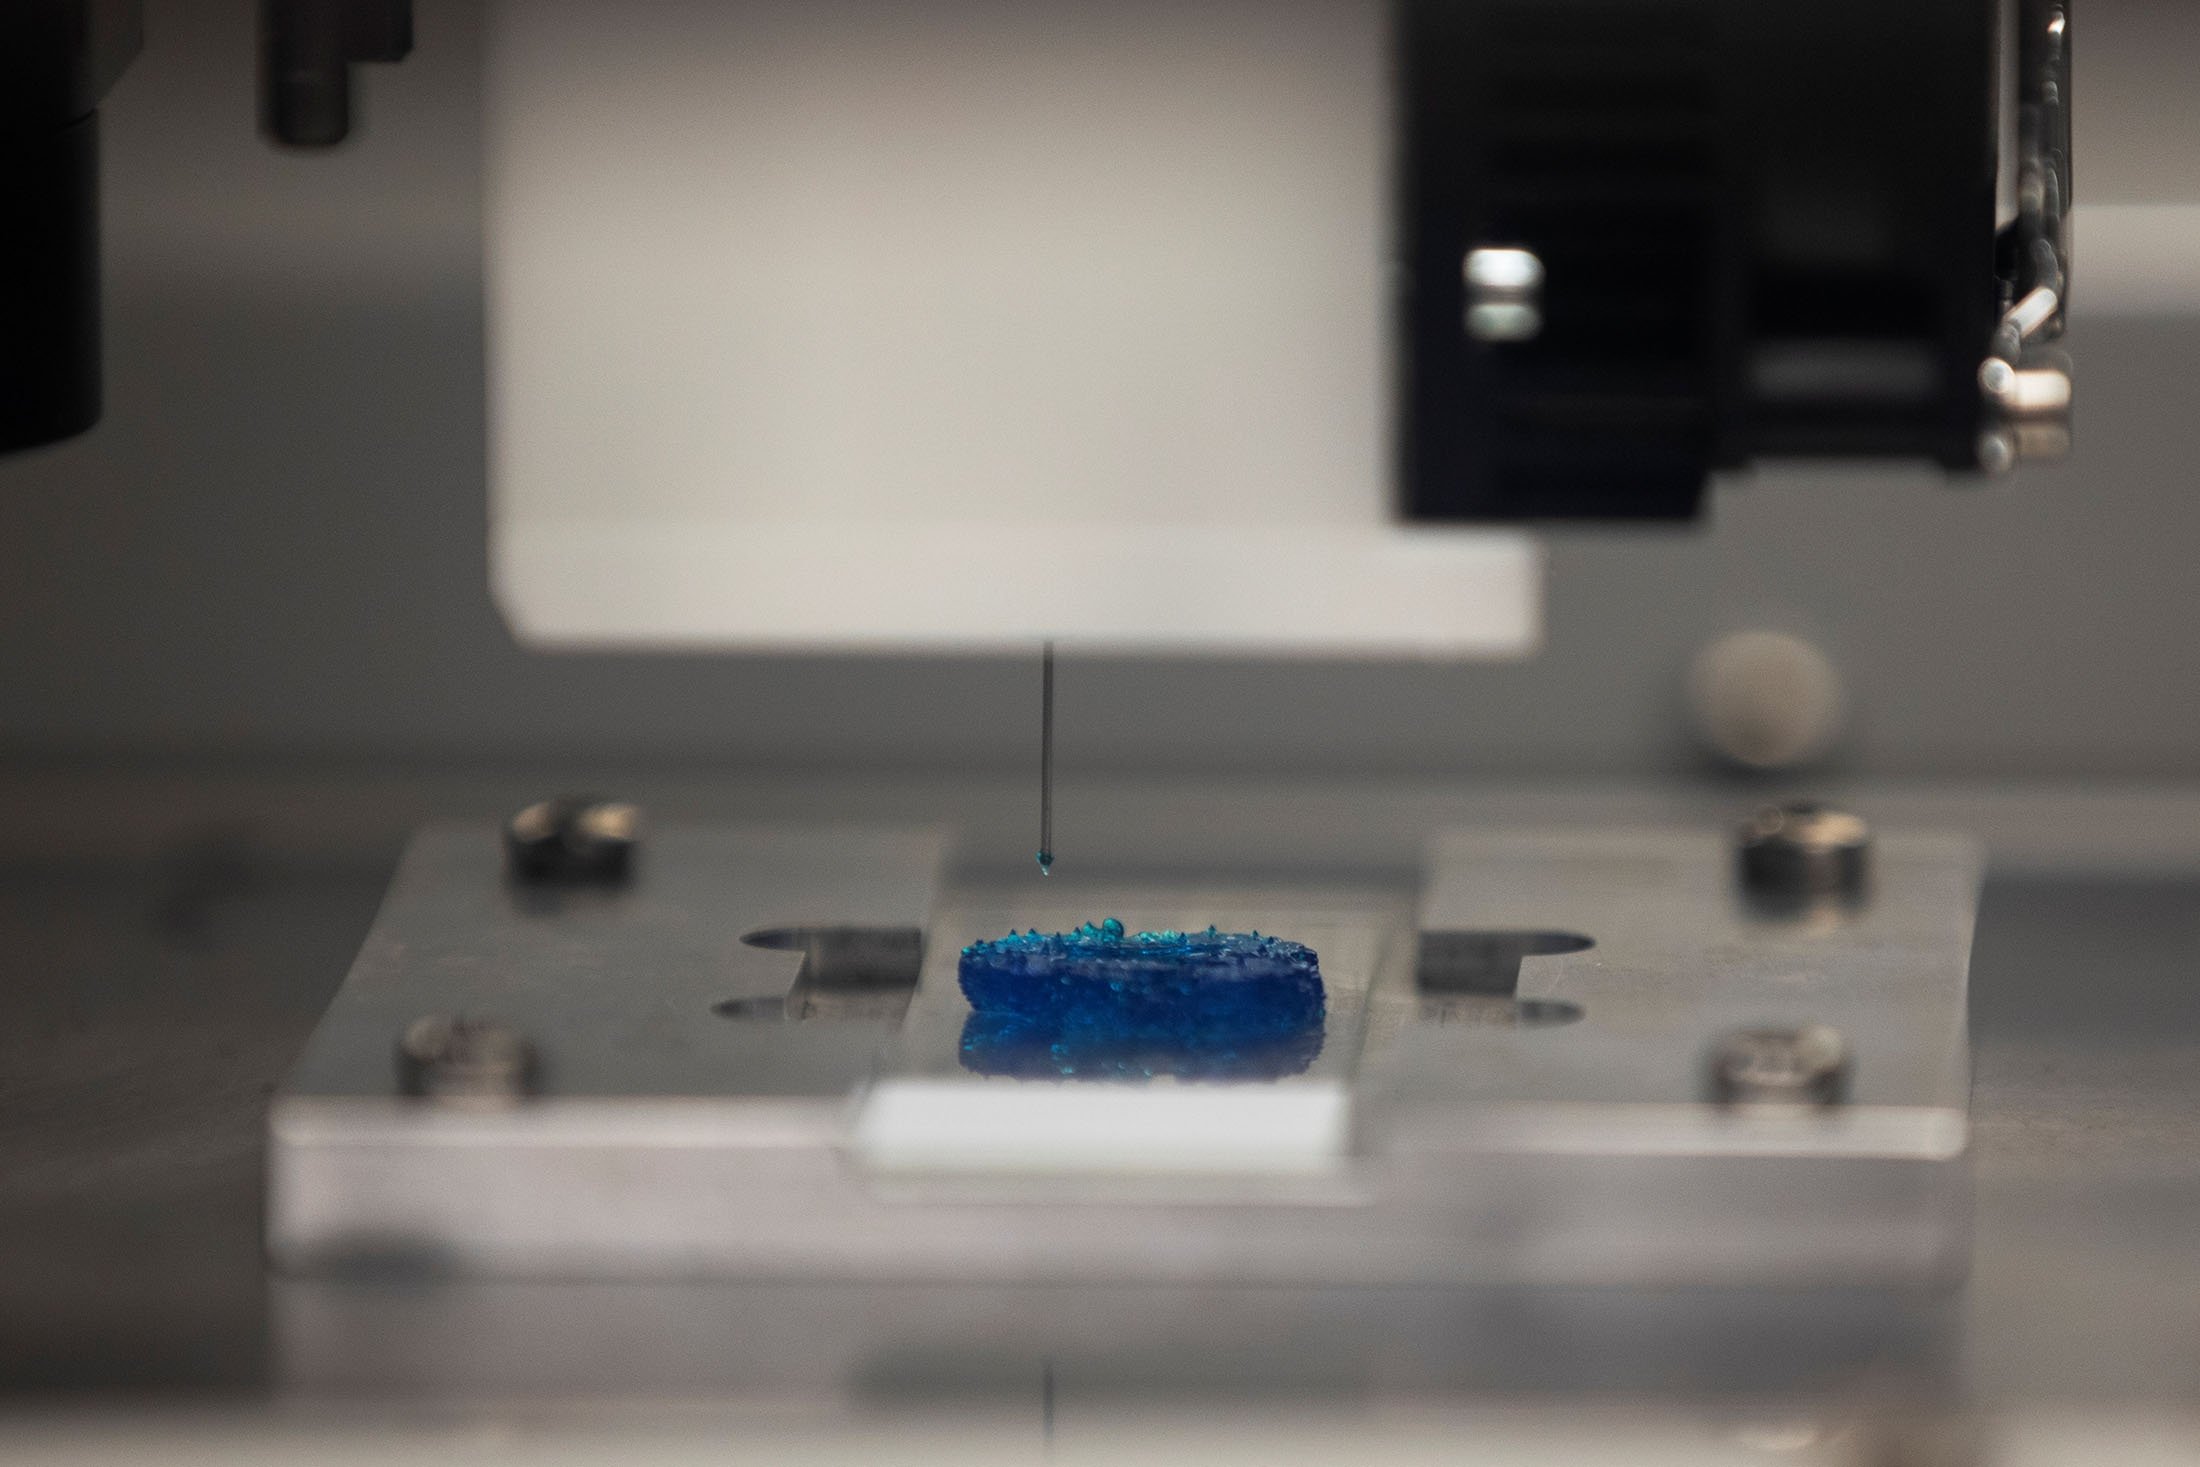 A 3D model of a tumor is made using bioprinting technology, as part of brain cancer research that uses patients